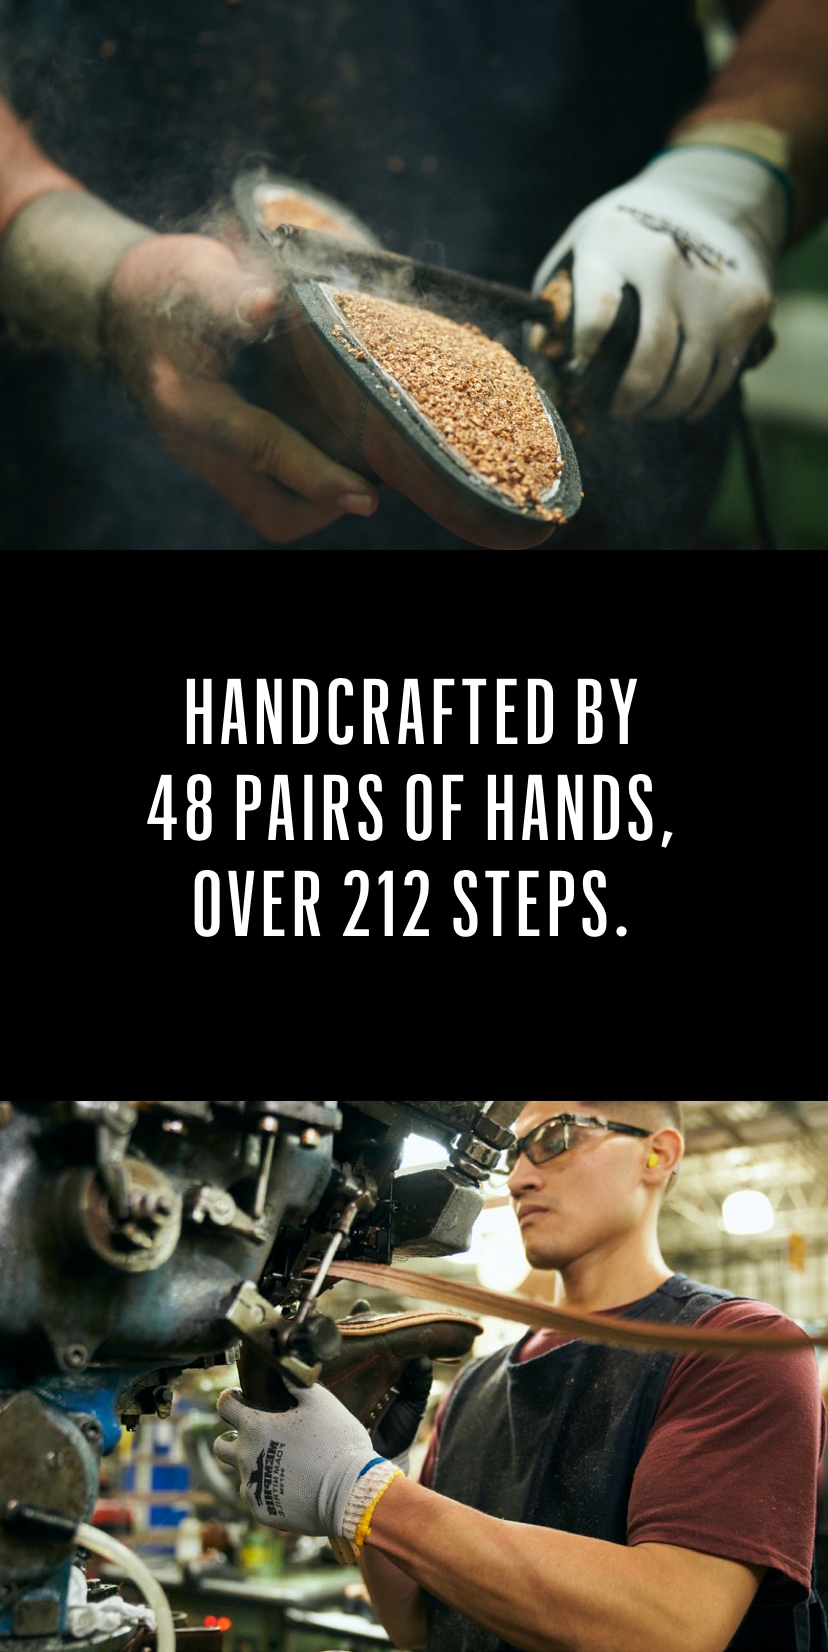 Handcrafted by 48 pairs of hands over 212 steps